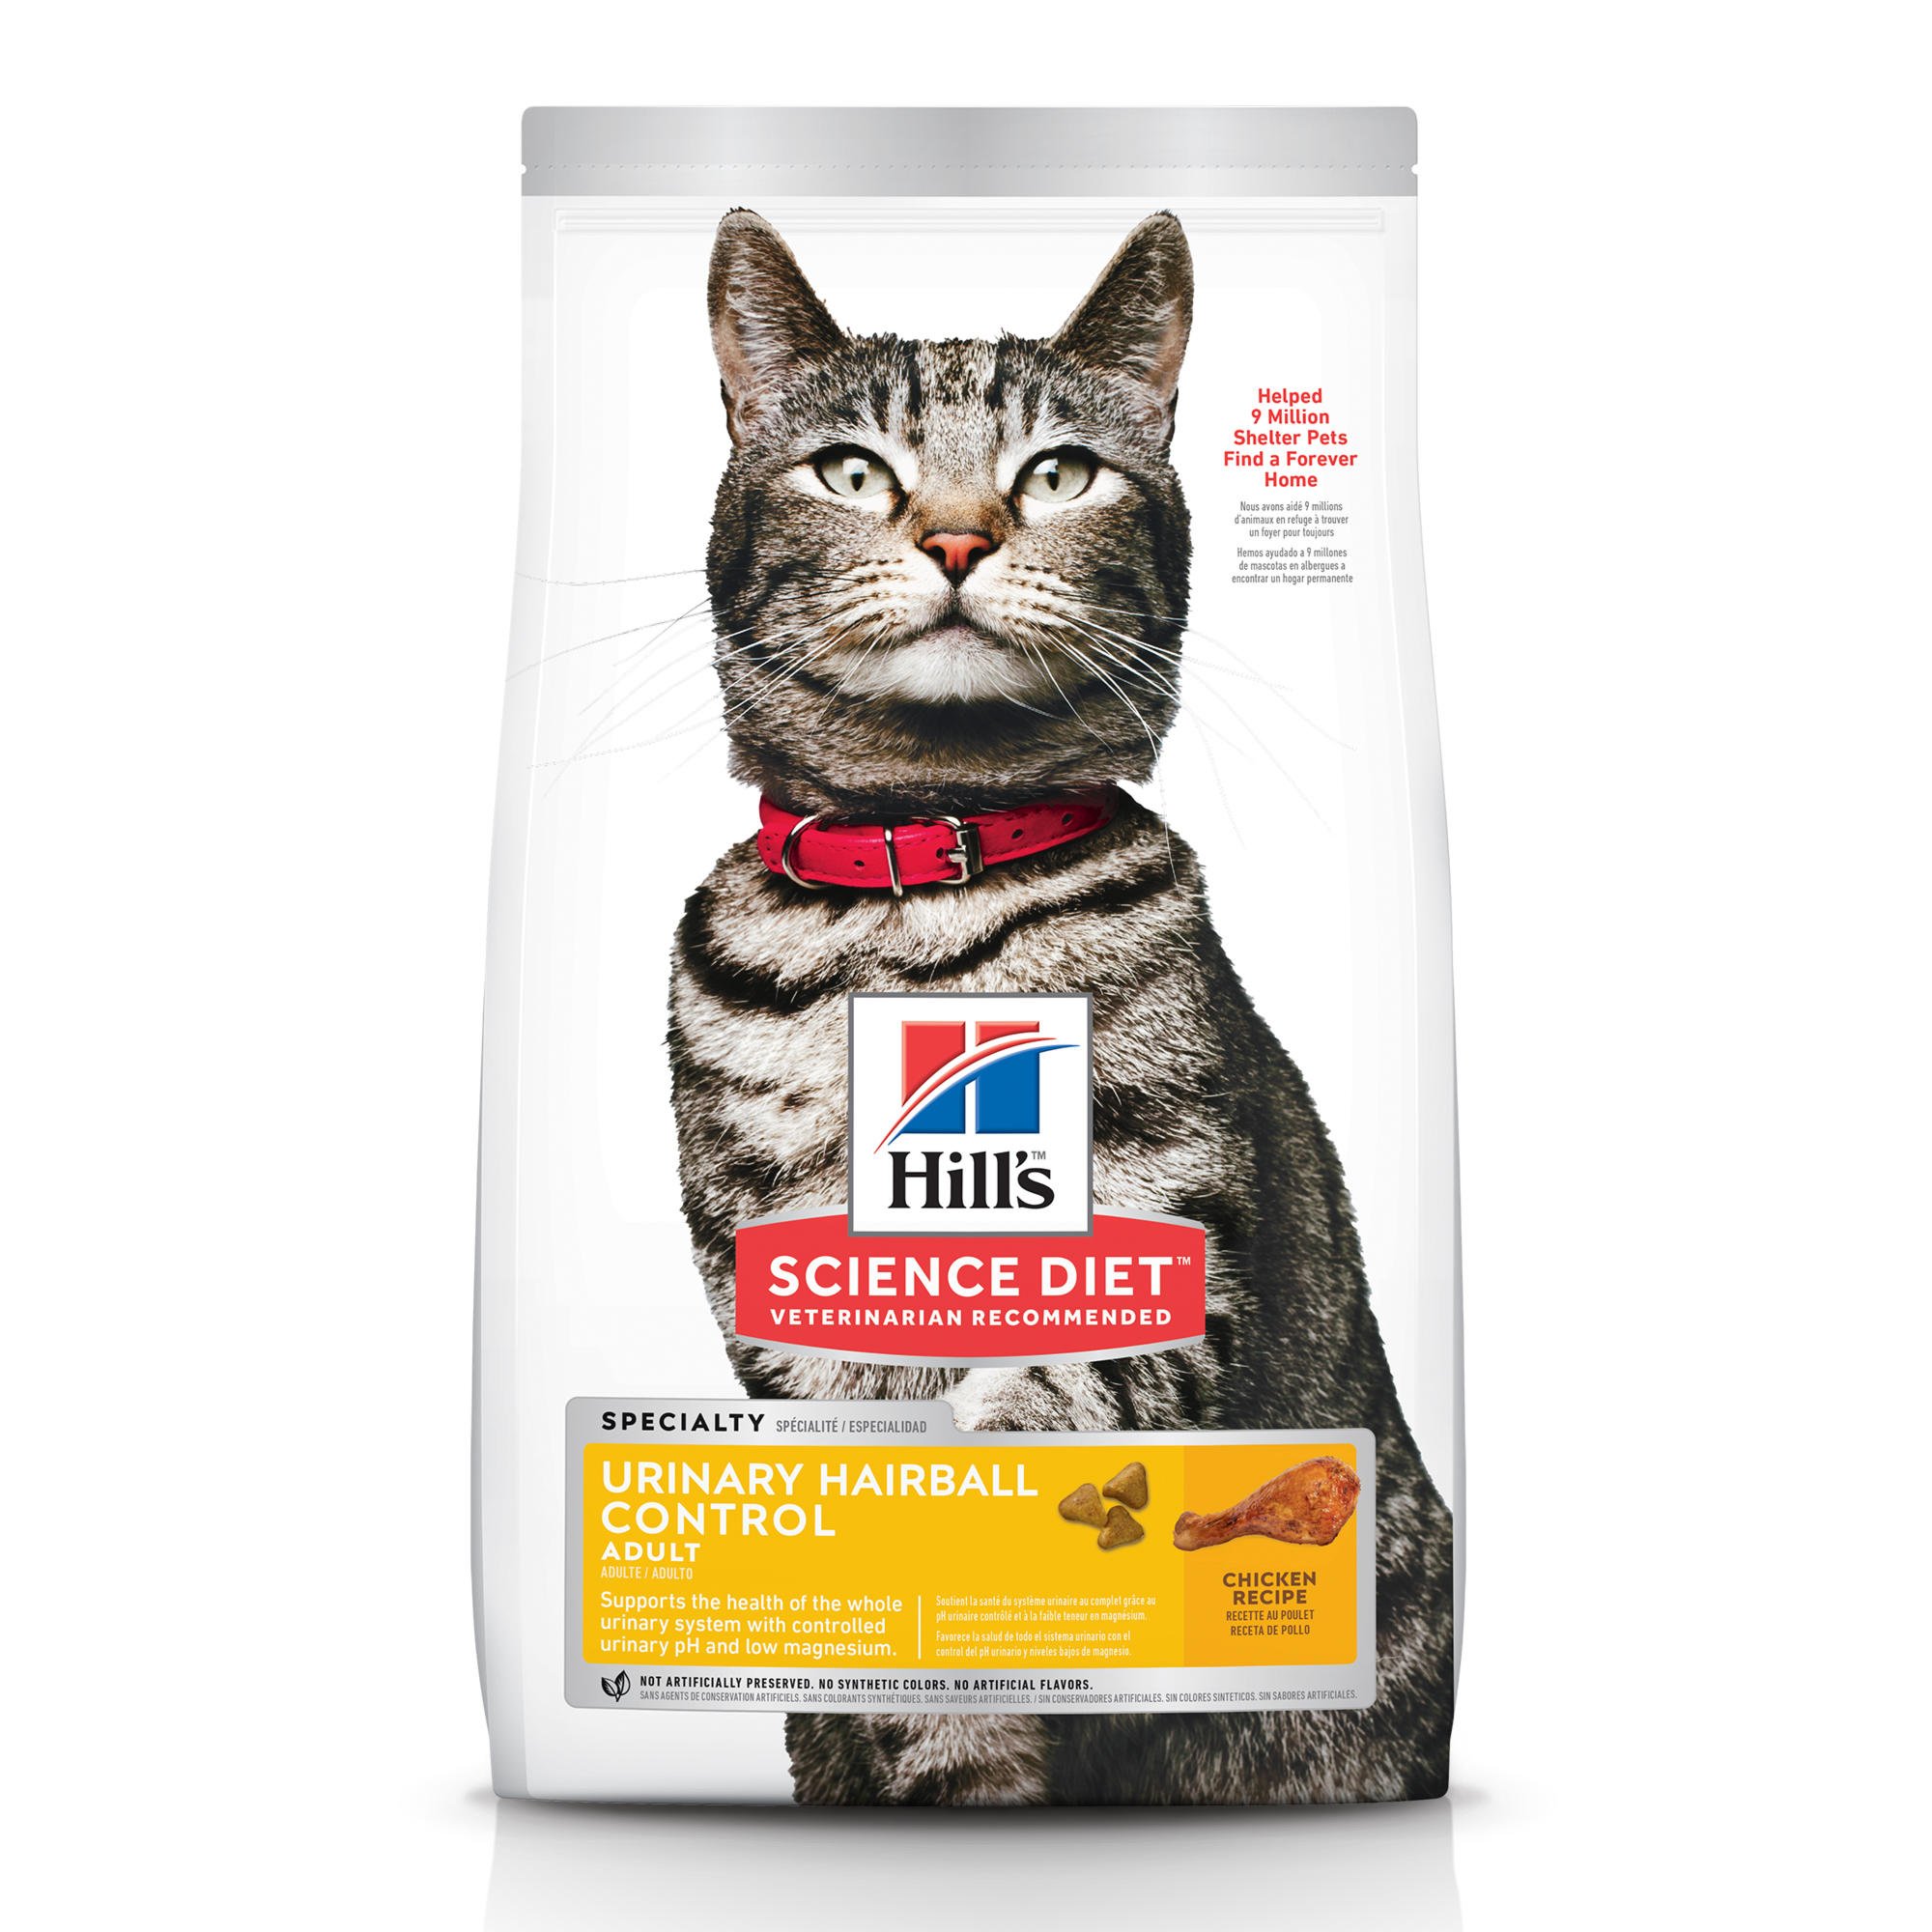 Hill's Science Diet Urinary Hairball Control Adult Chicken Dry Cat Food